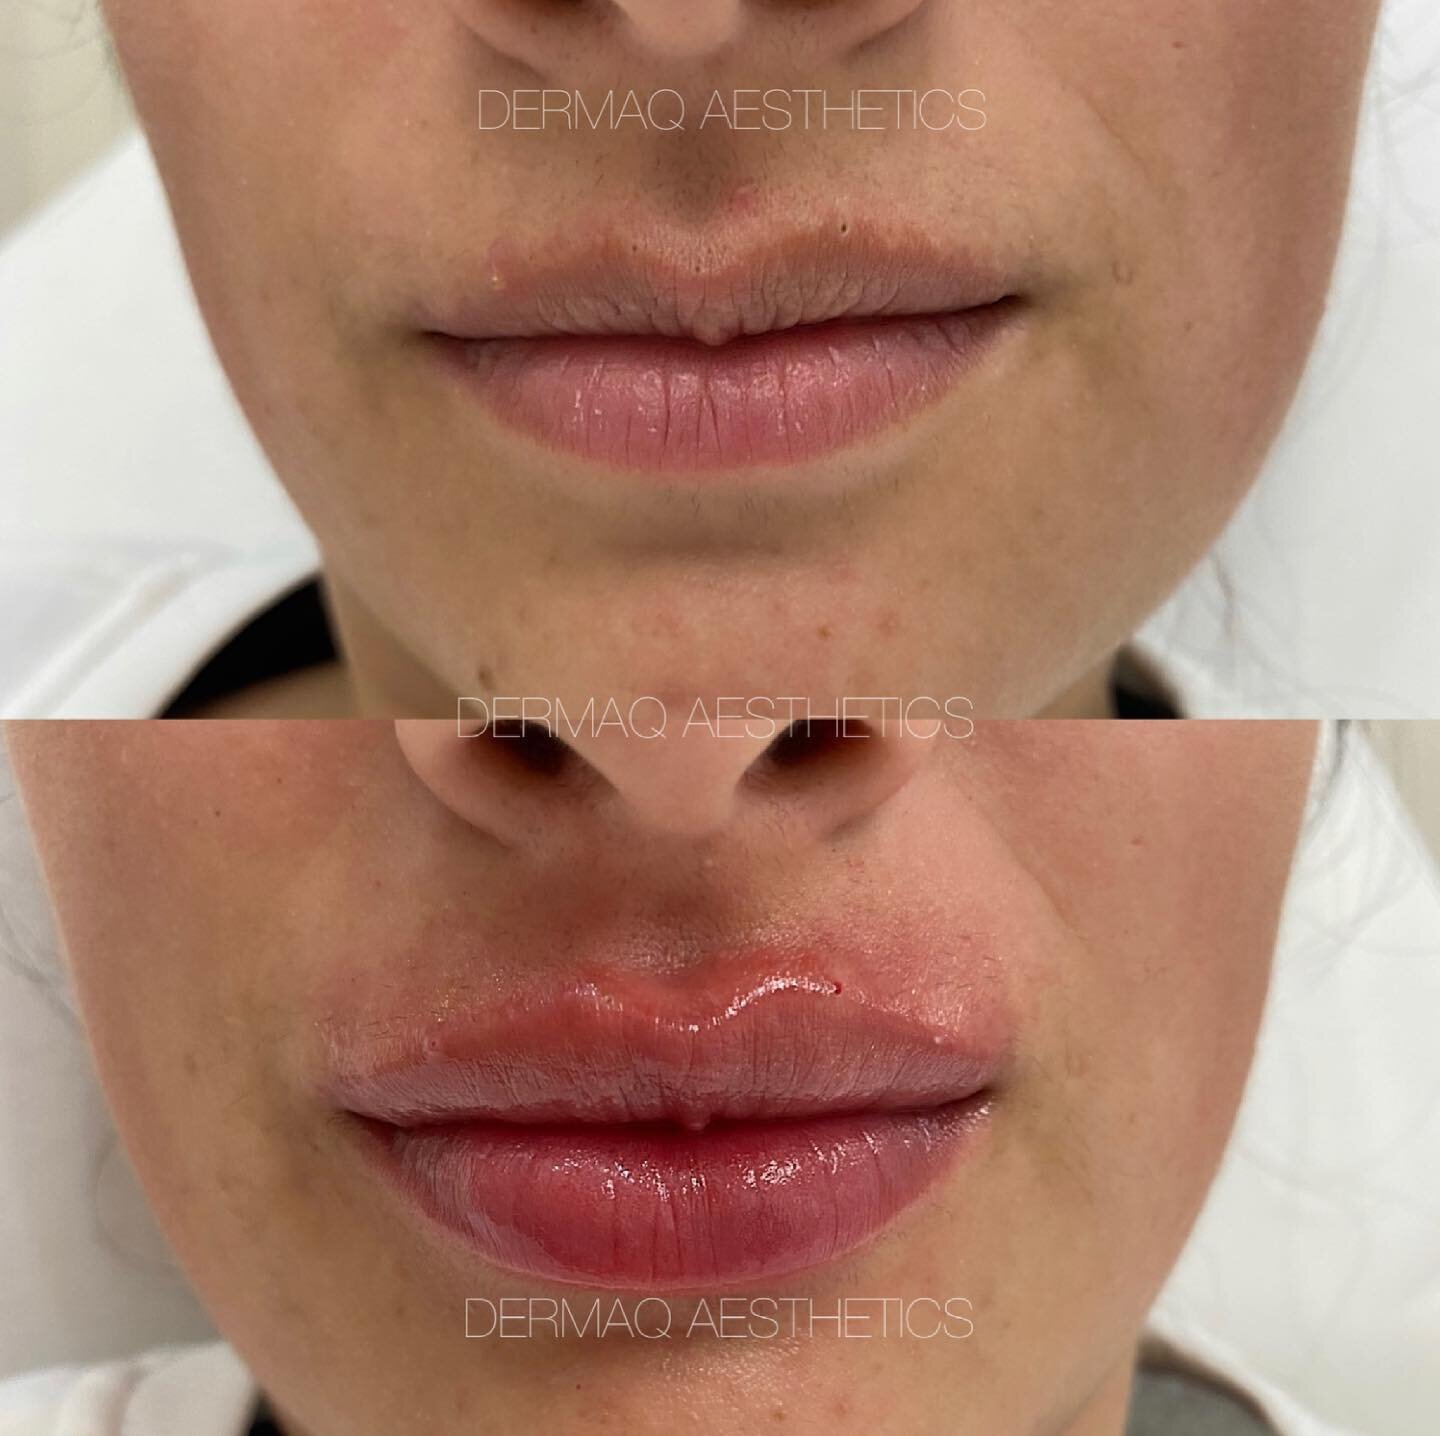 Subtle lip enhancement and definition of the border 🤍

💉 Treatment: 0.8ml of premium lip filler
⏰ Downtime: None. Mild bruising and swelling for 3-5 days following
⏳ Longevity: 9-12 months
👩🏼&zwj;⚕️ Injector: Madeline
📱 Bookings: dermaq.co or DM